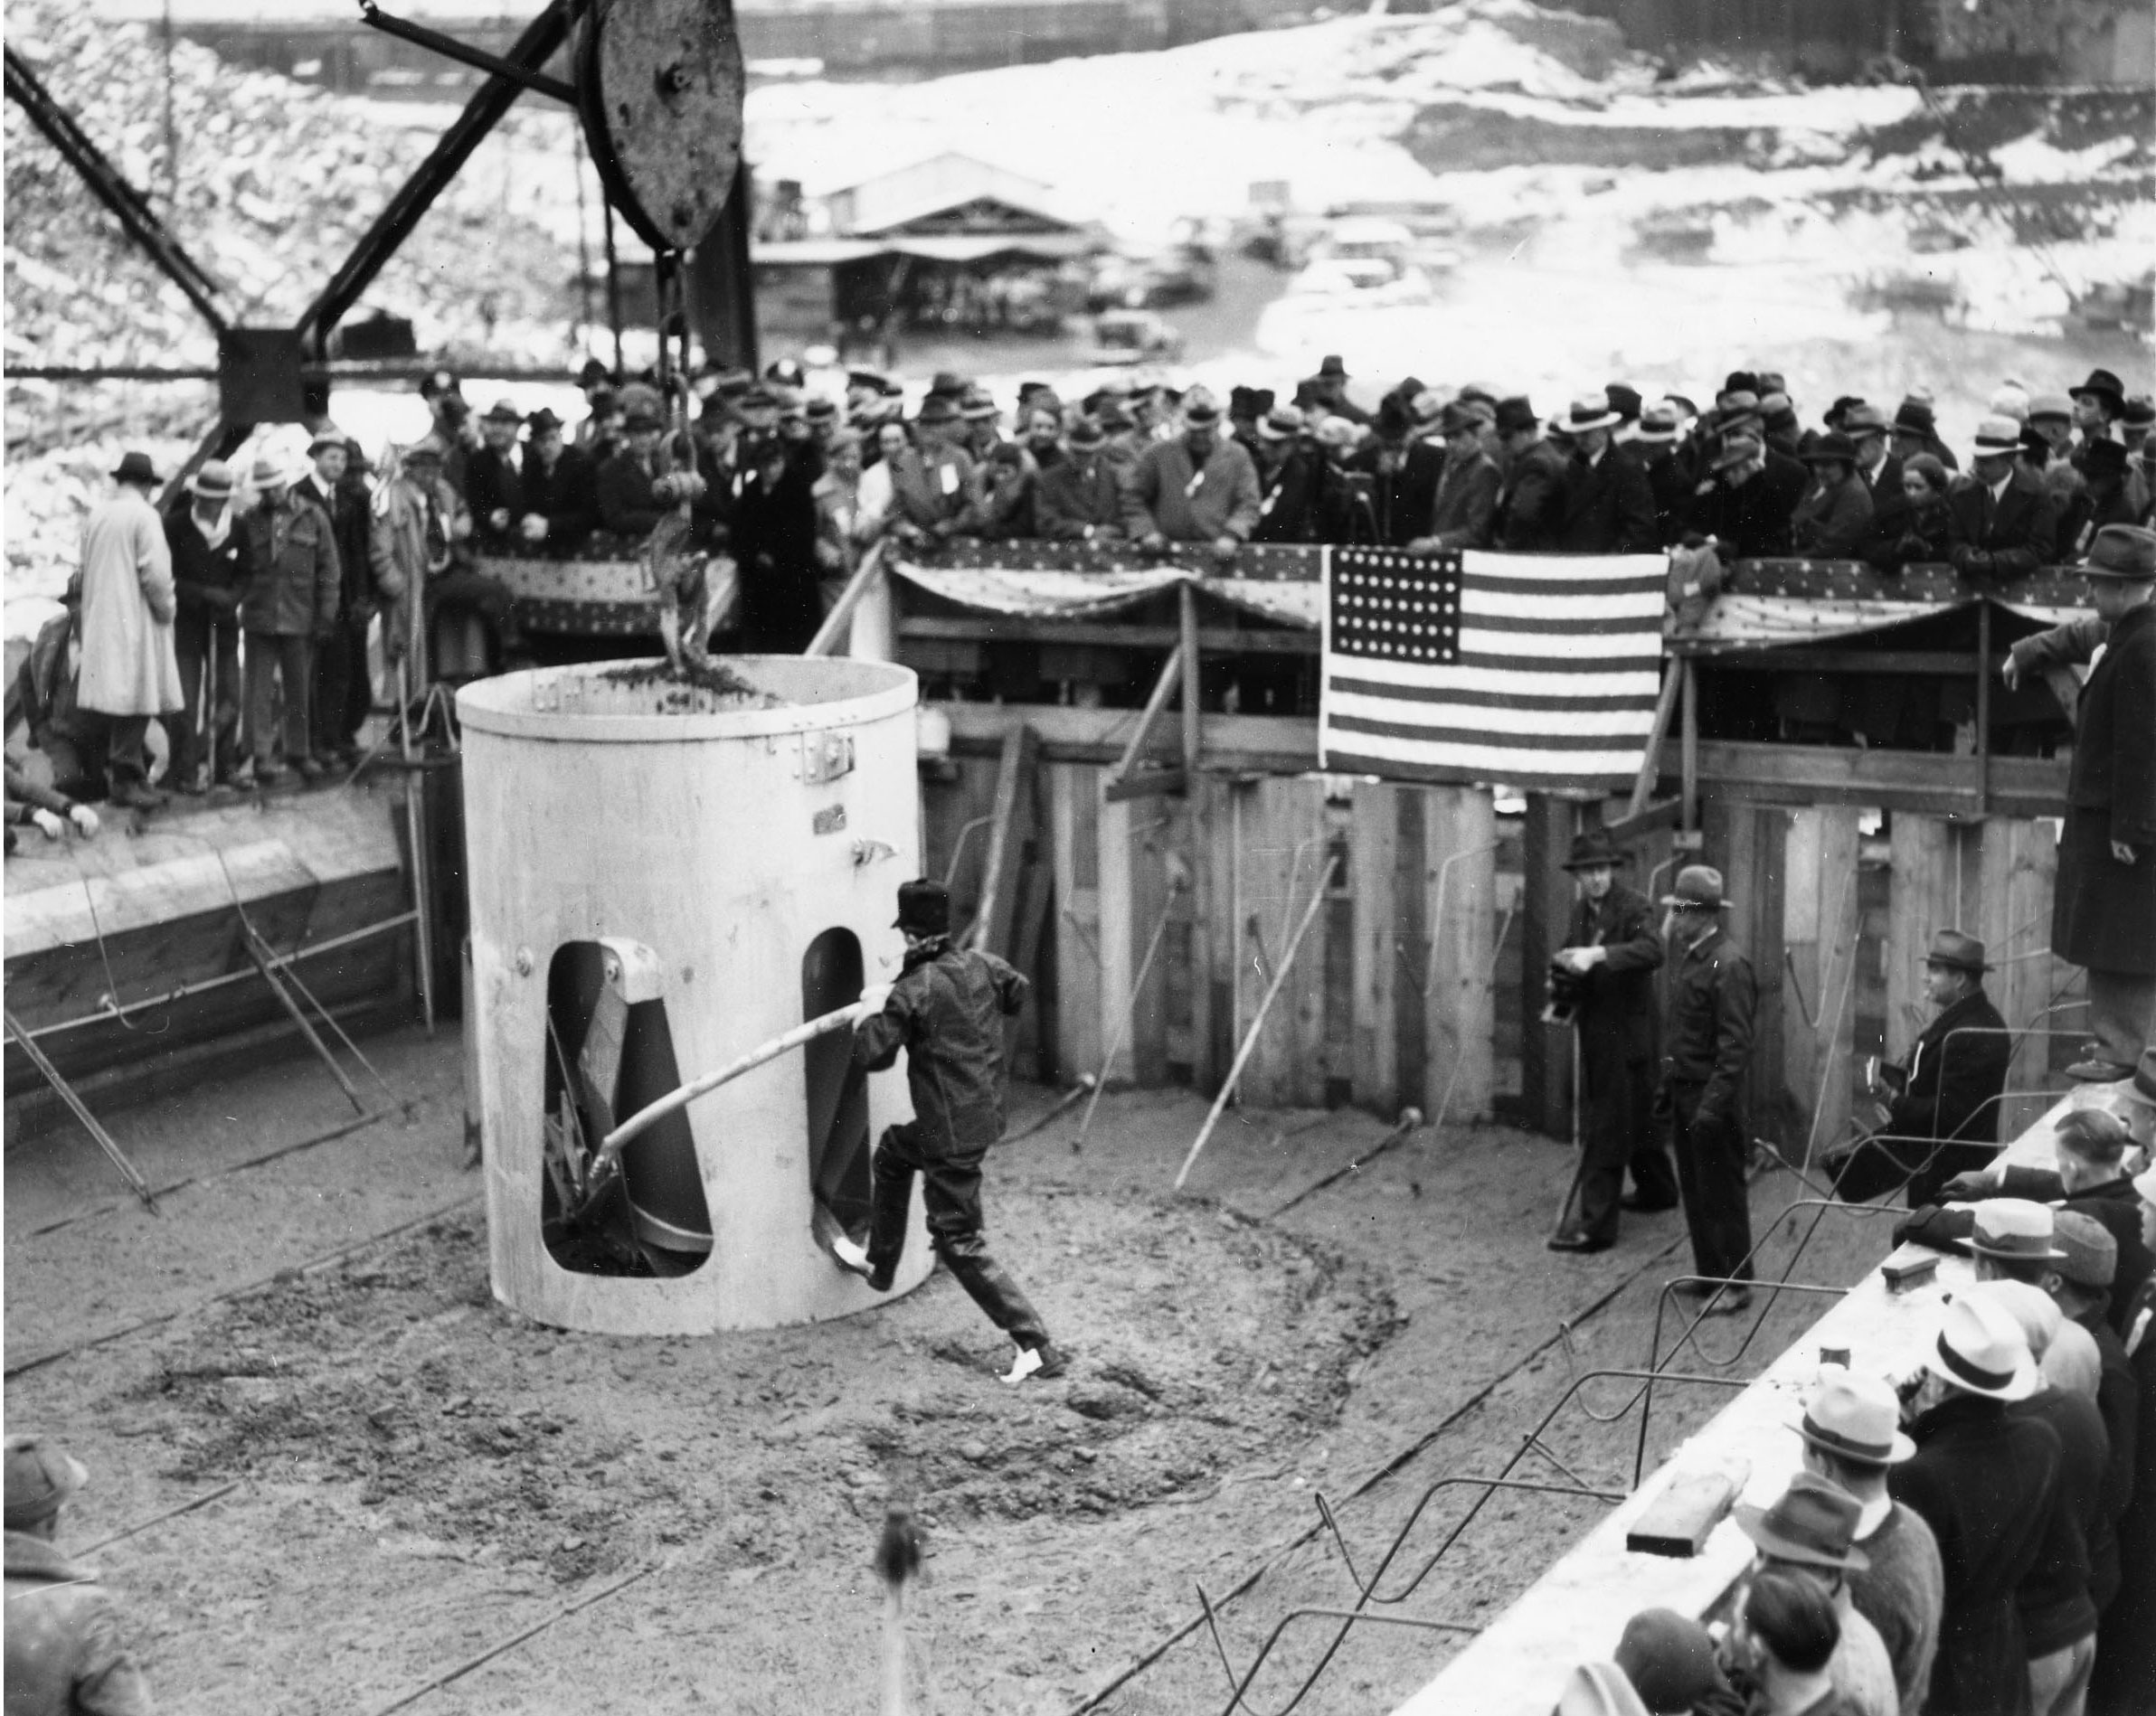 December 6, 1935. Governor Clarence C. Martin placing official first concrete pour at Grand Coulee Dam.